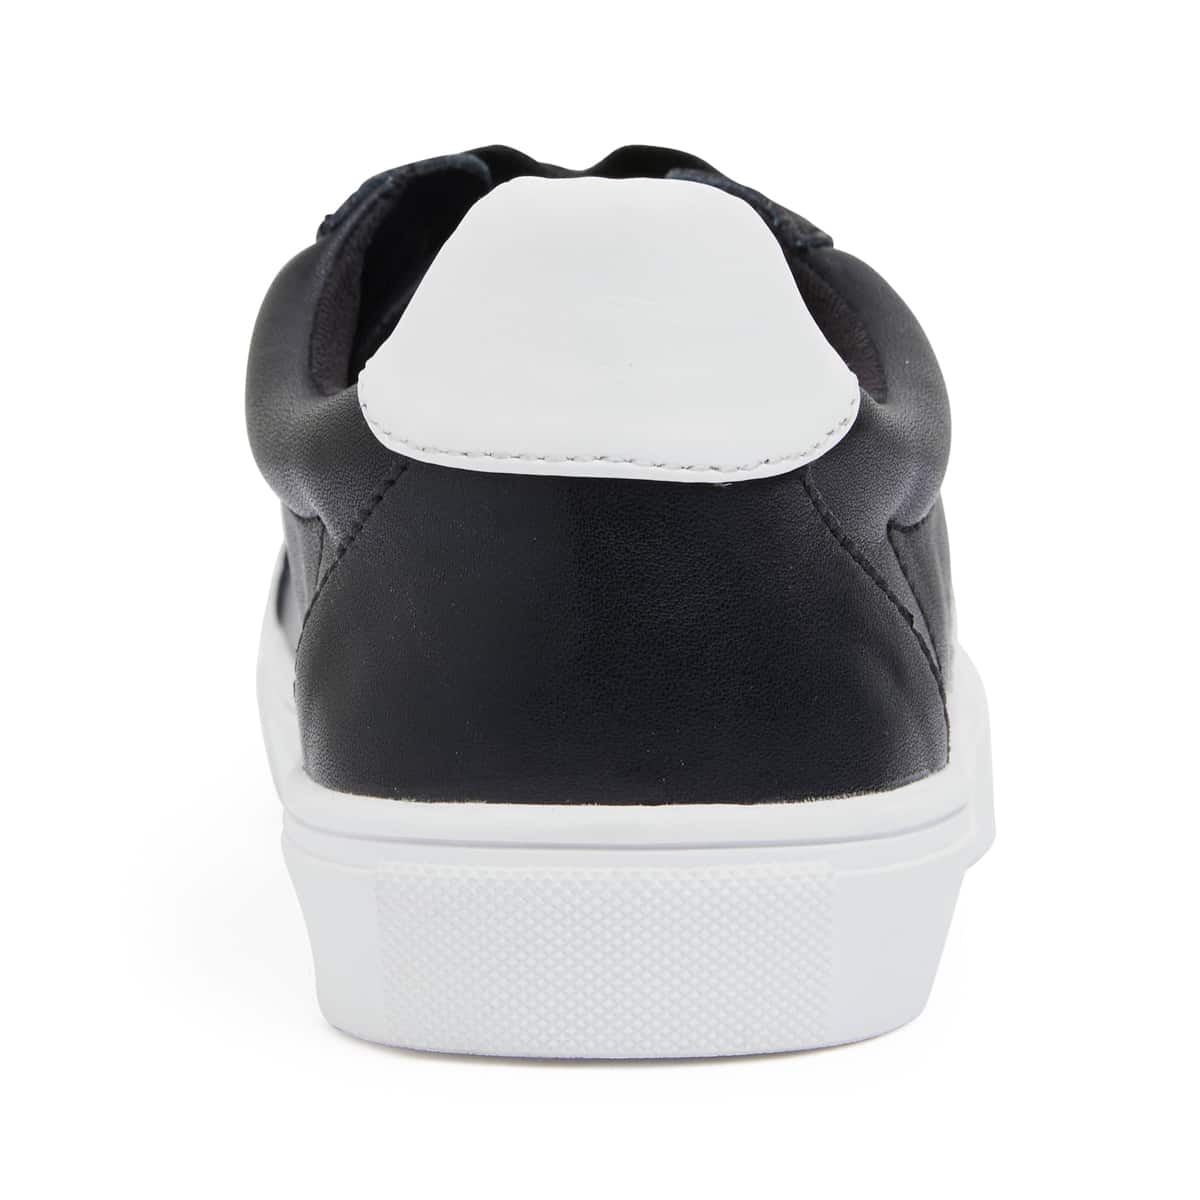 Saxon Sneaker in Black And White Leather